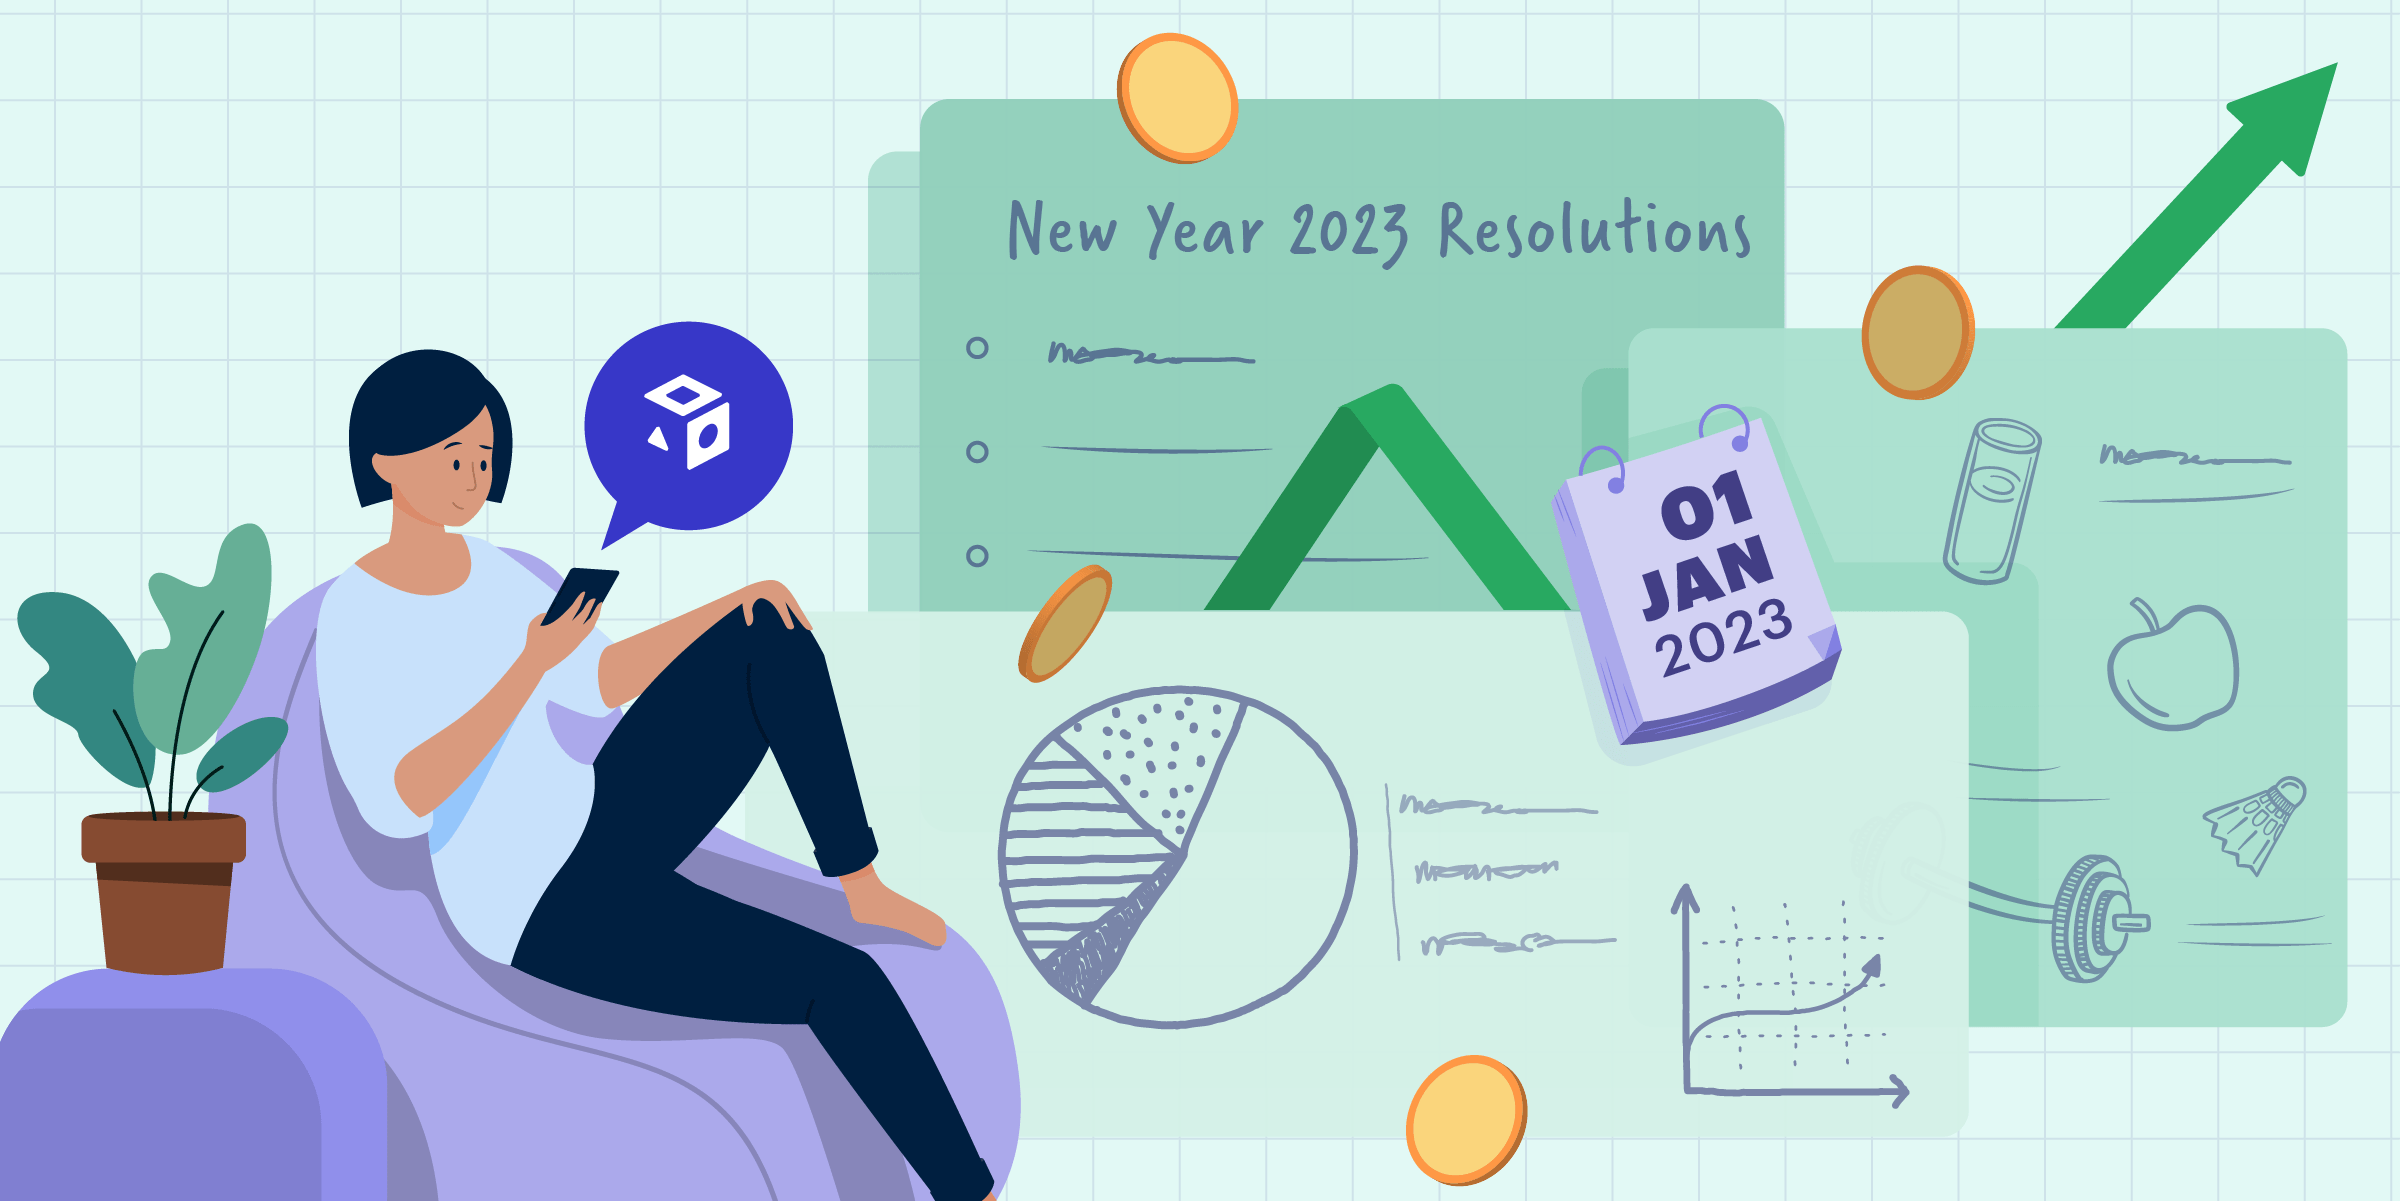 What’s your financial resolution for 2023?